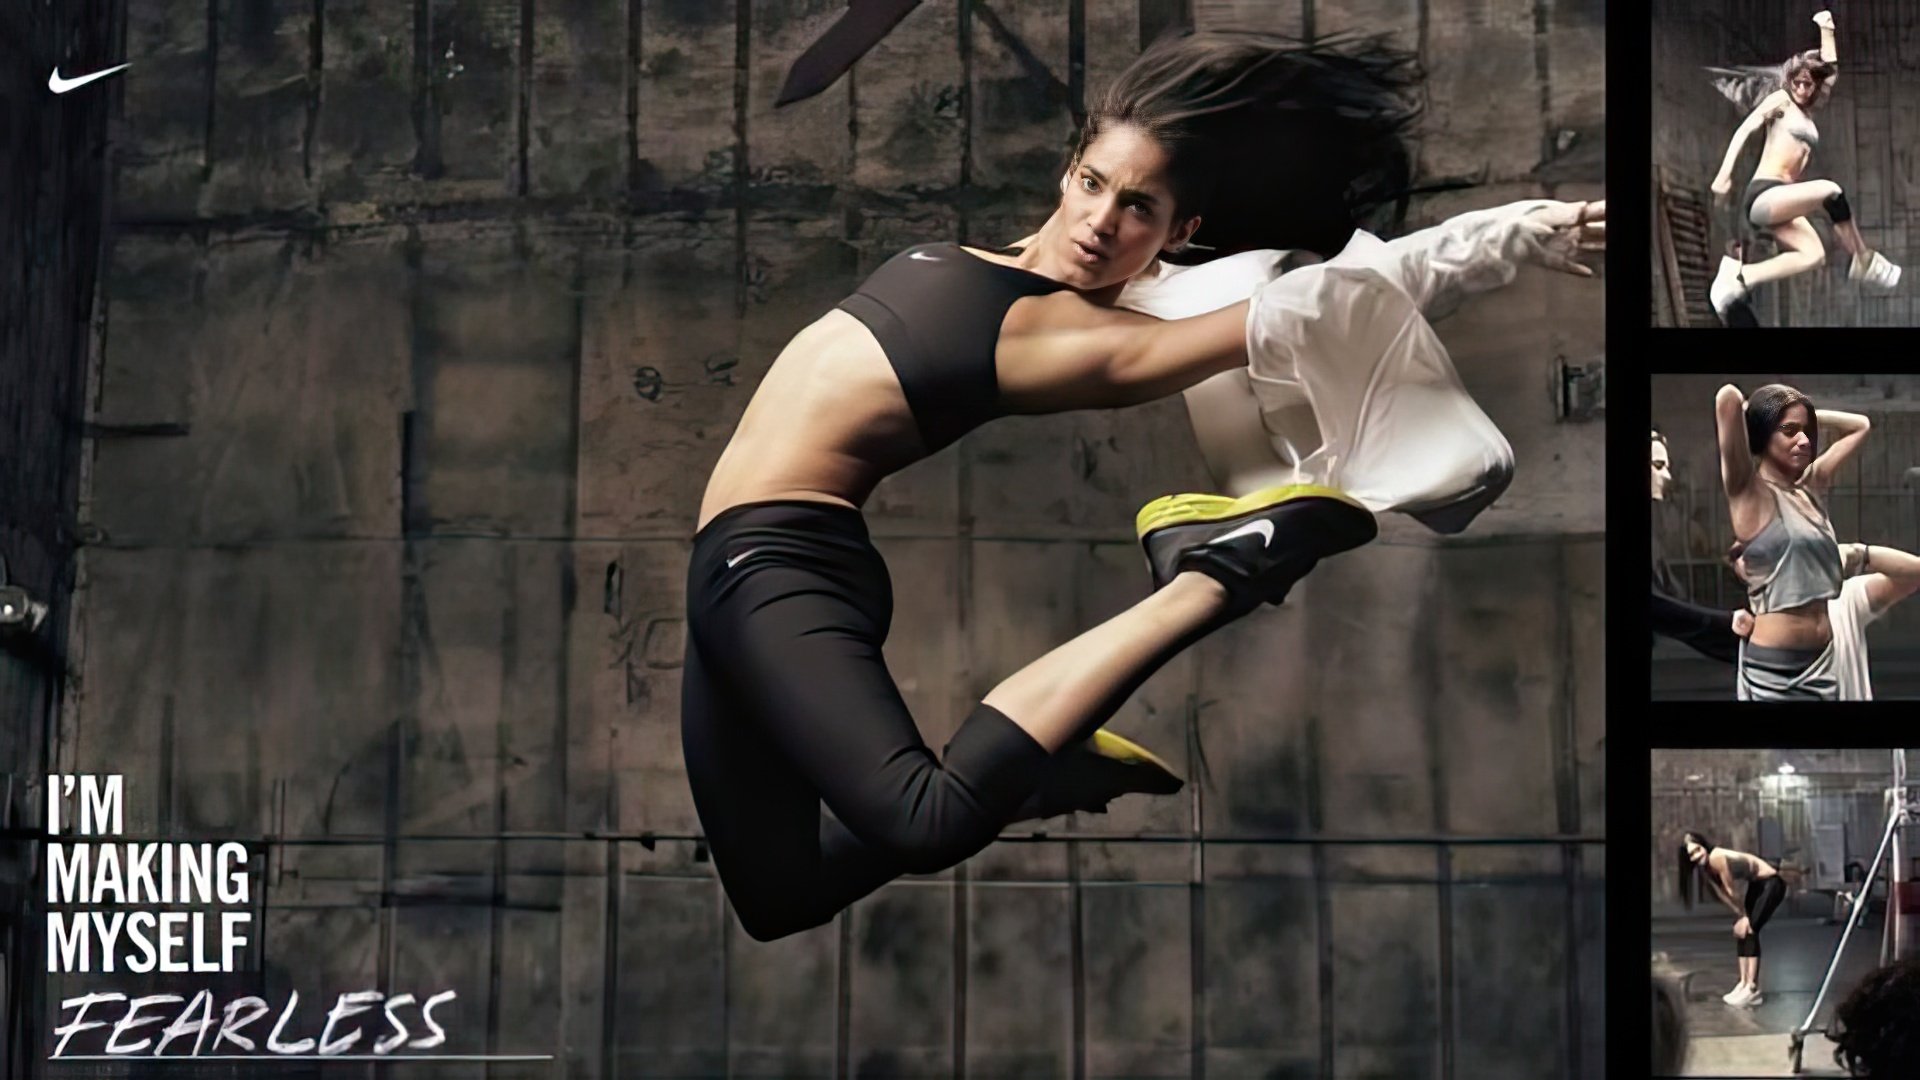 Sofia Boutella Signed a Contract with Nike